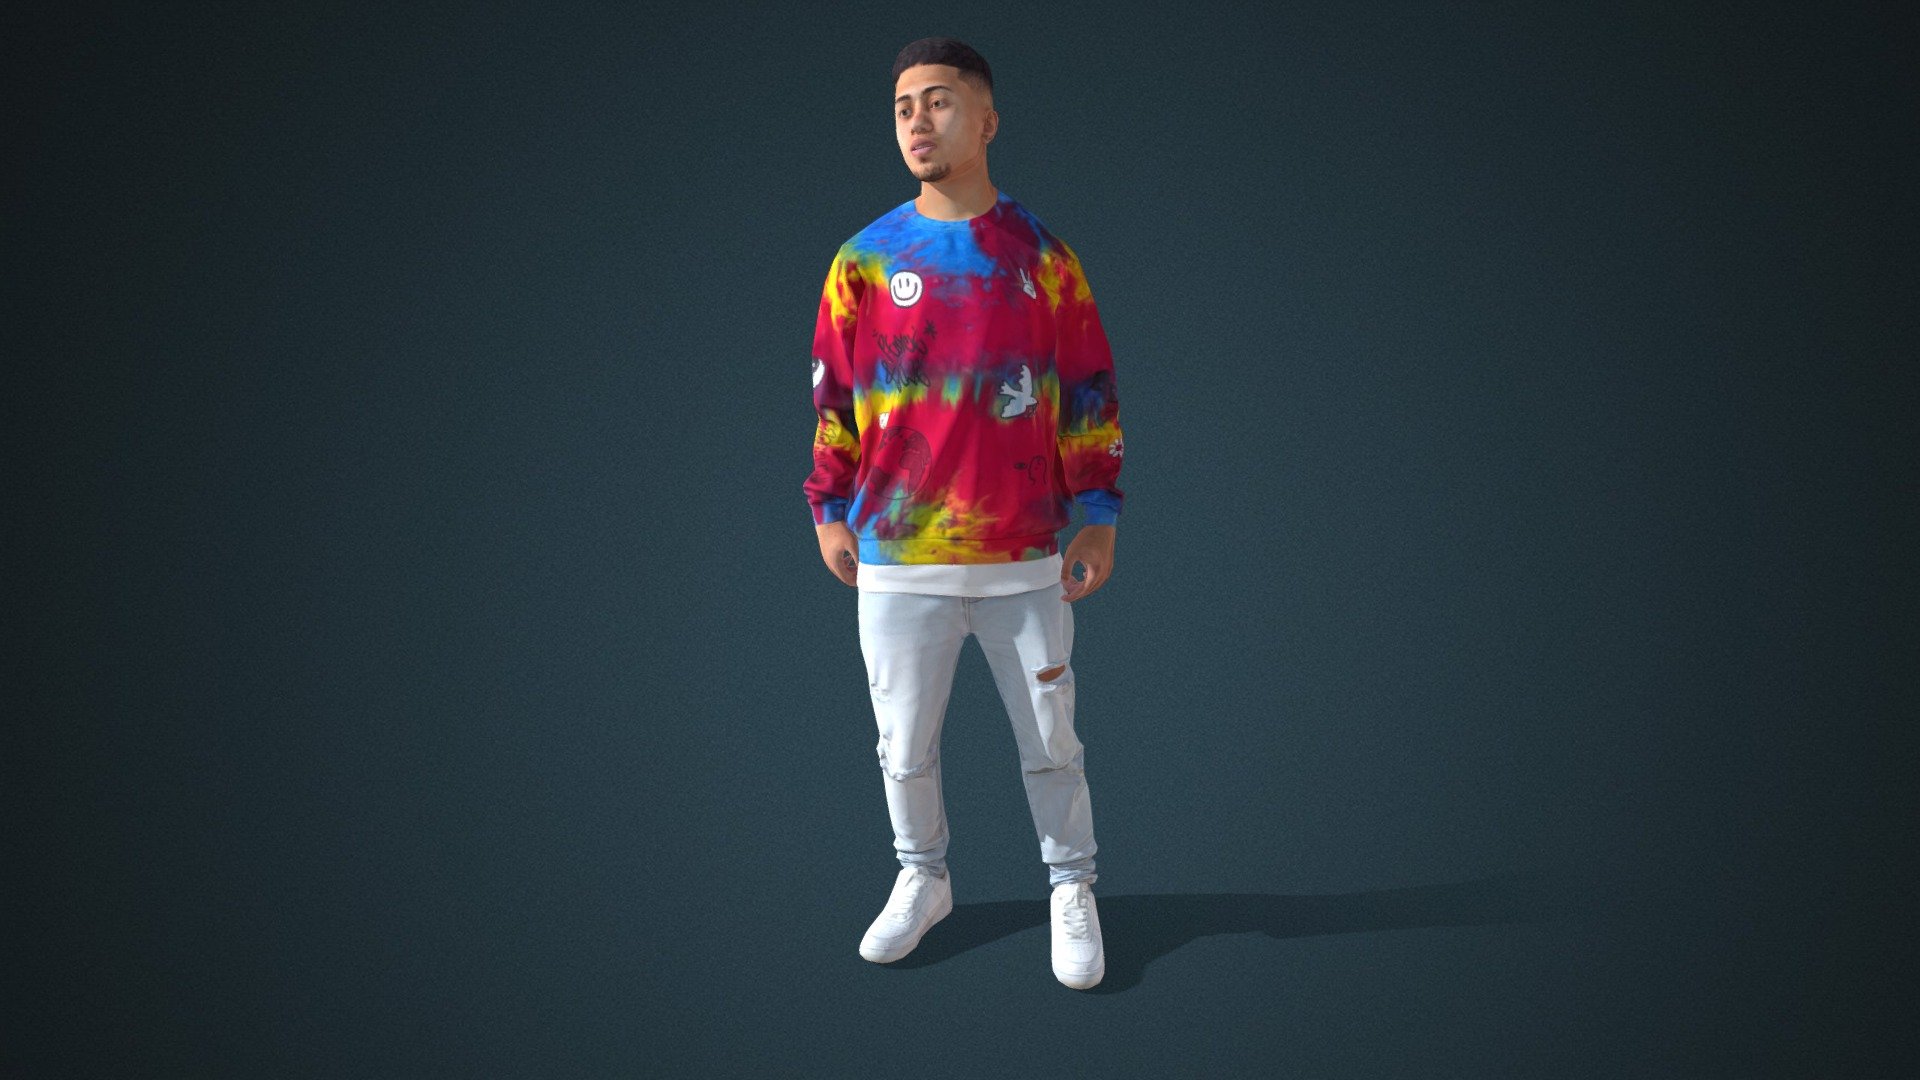 Do you like this model?  Free Download more models, motions and auto rigging tool AccuRIG (Value: $150+) on ActorCore
 

This model includes 2 mocap animations: Modern_M_Idle,Male_walk. Get more free motions

Design for high-performance crowd animation.

Buy full pack and Save 20%+: Young Fashion Vol.4


SPECIFICATIONS

✔ Geometry : 7K~10K Quads, one mesh

✔ Material : One material with changeable colors.

✔ Texture Resolution : 4K

✔ Shader : PBR, Diffuse, Normal, Roughness, Metallic, Opacity

✔ Rigged : Facial and Body (shoulders, fingers, toes, eyeballs, jaw)

✔ Blendshape : 122 for facial expressions and lipsync

✔ Compatible with iClone AccuLips, Facial ExPlus, and traditional lip-sync.


About Reallusion ActorCore

ActorCore offers the highest quality 3D asset libraries for mocap motions and animated 3D humans for crowd rendering 3d model